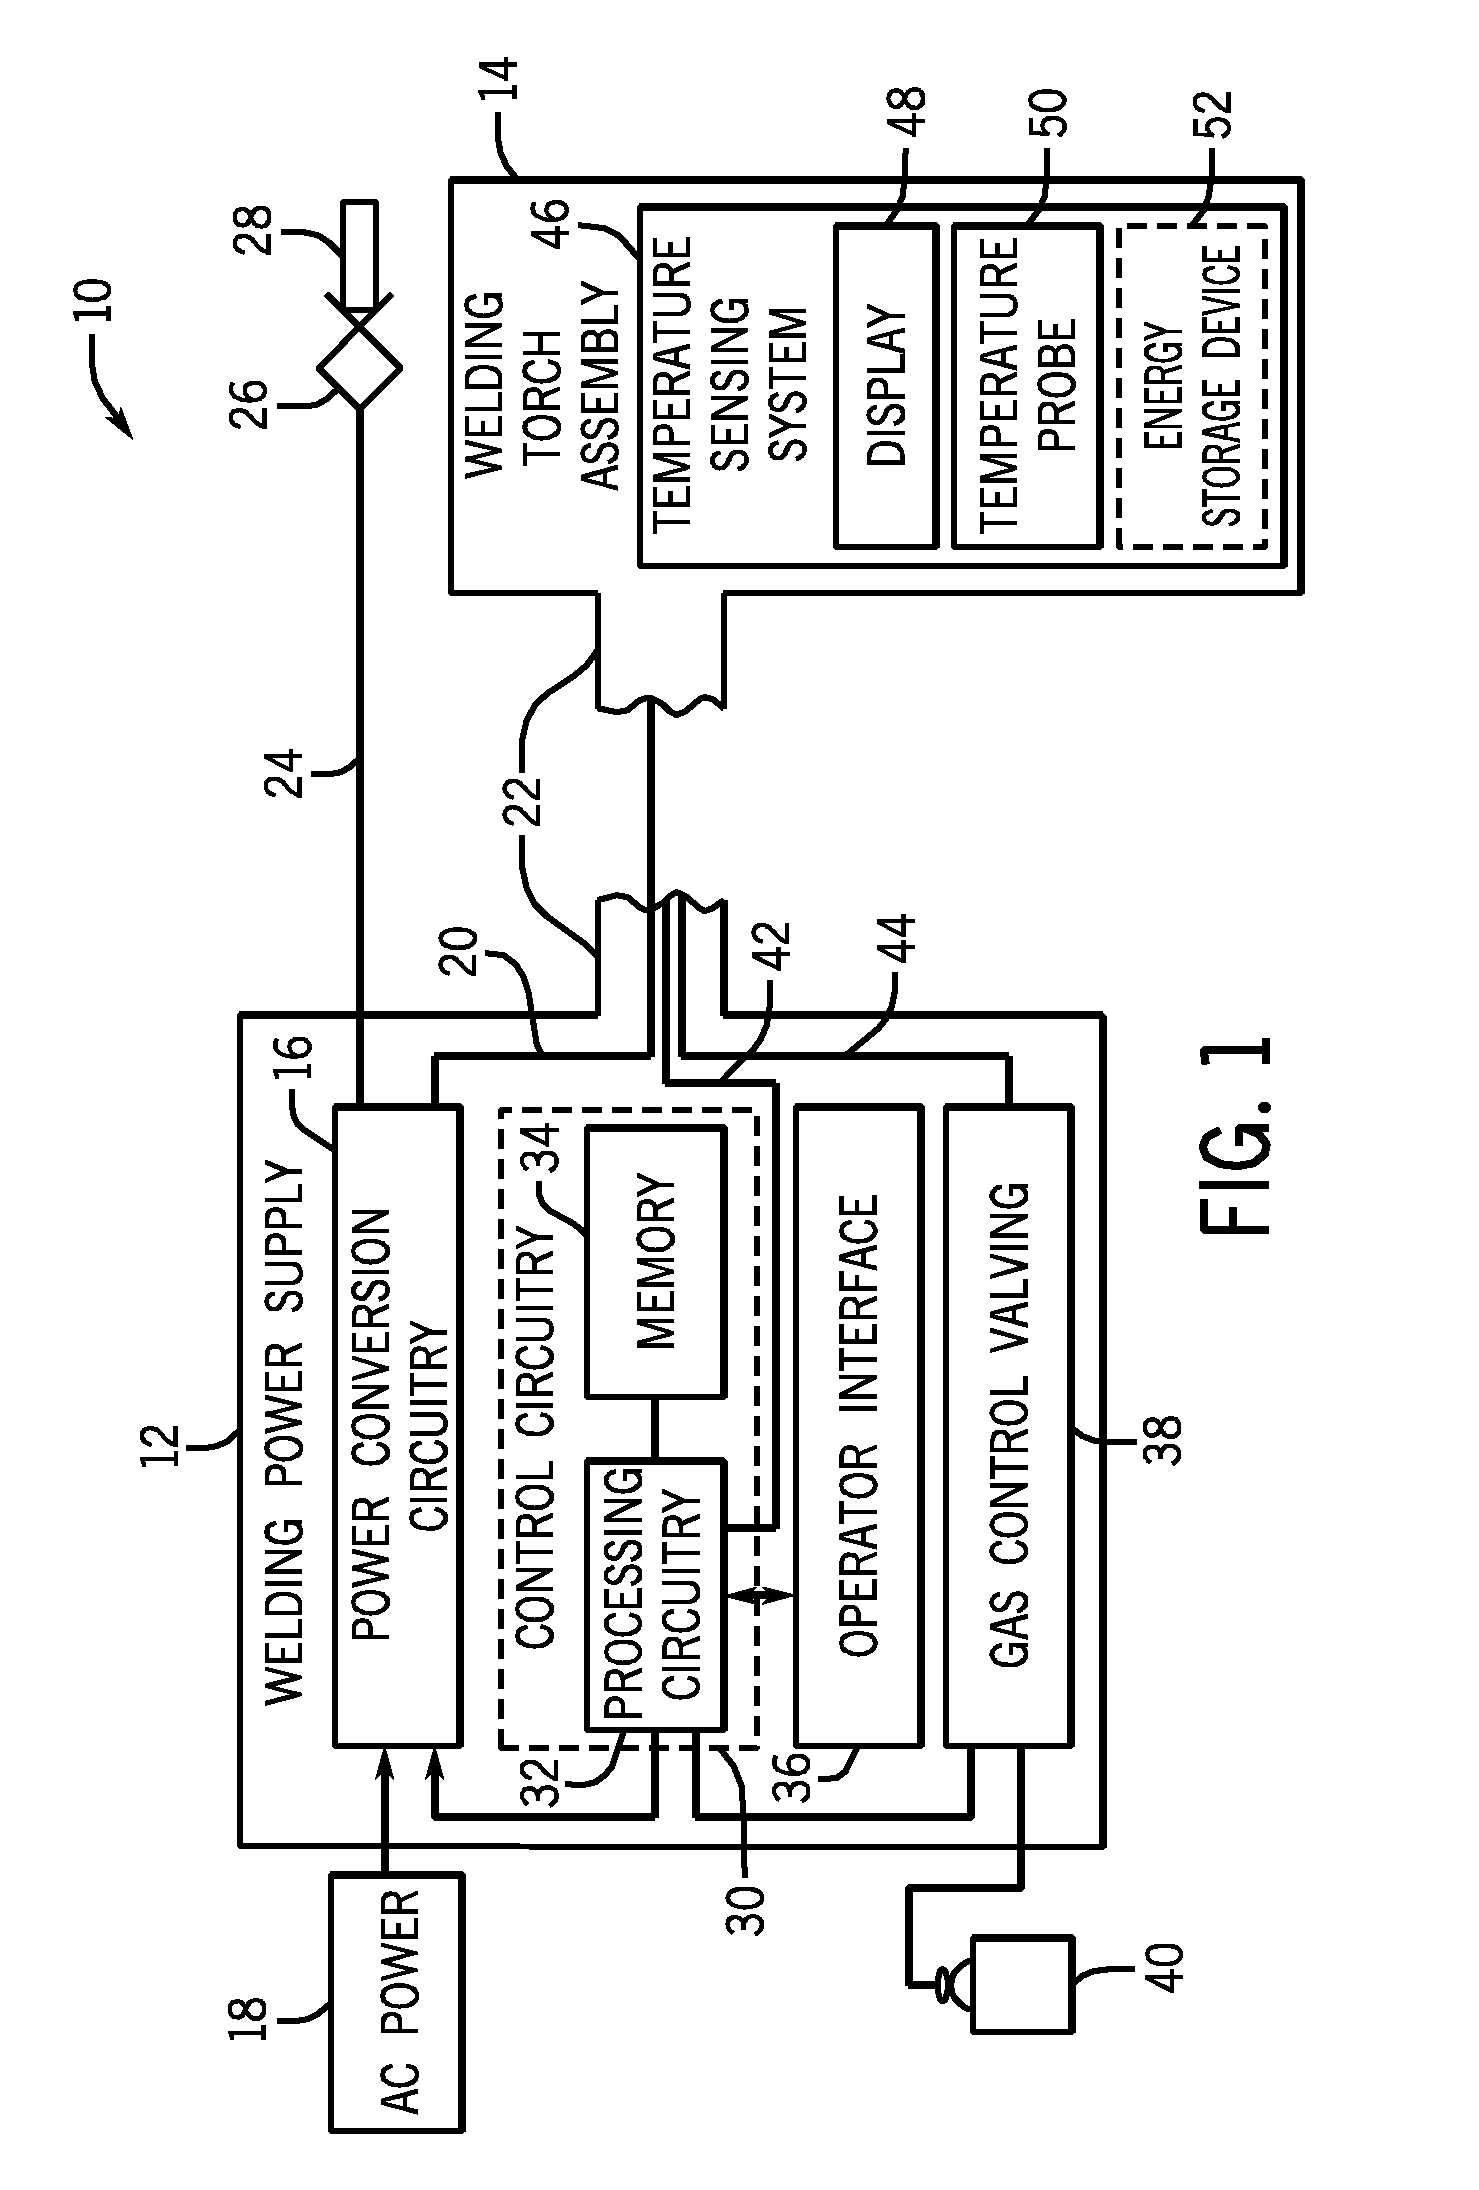 Welding systems having non-contact temperature measurement systems